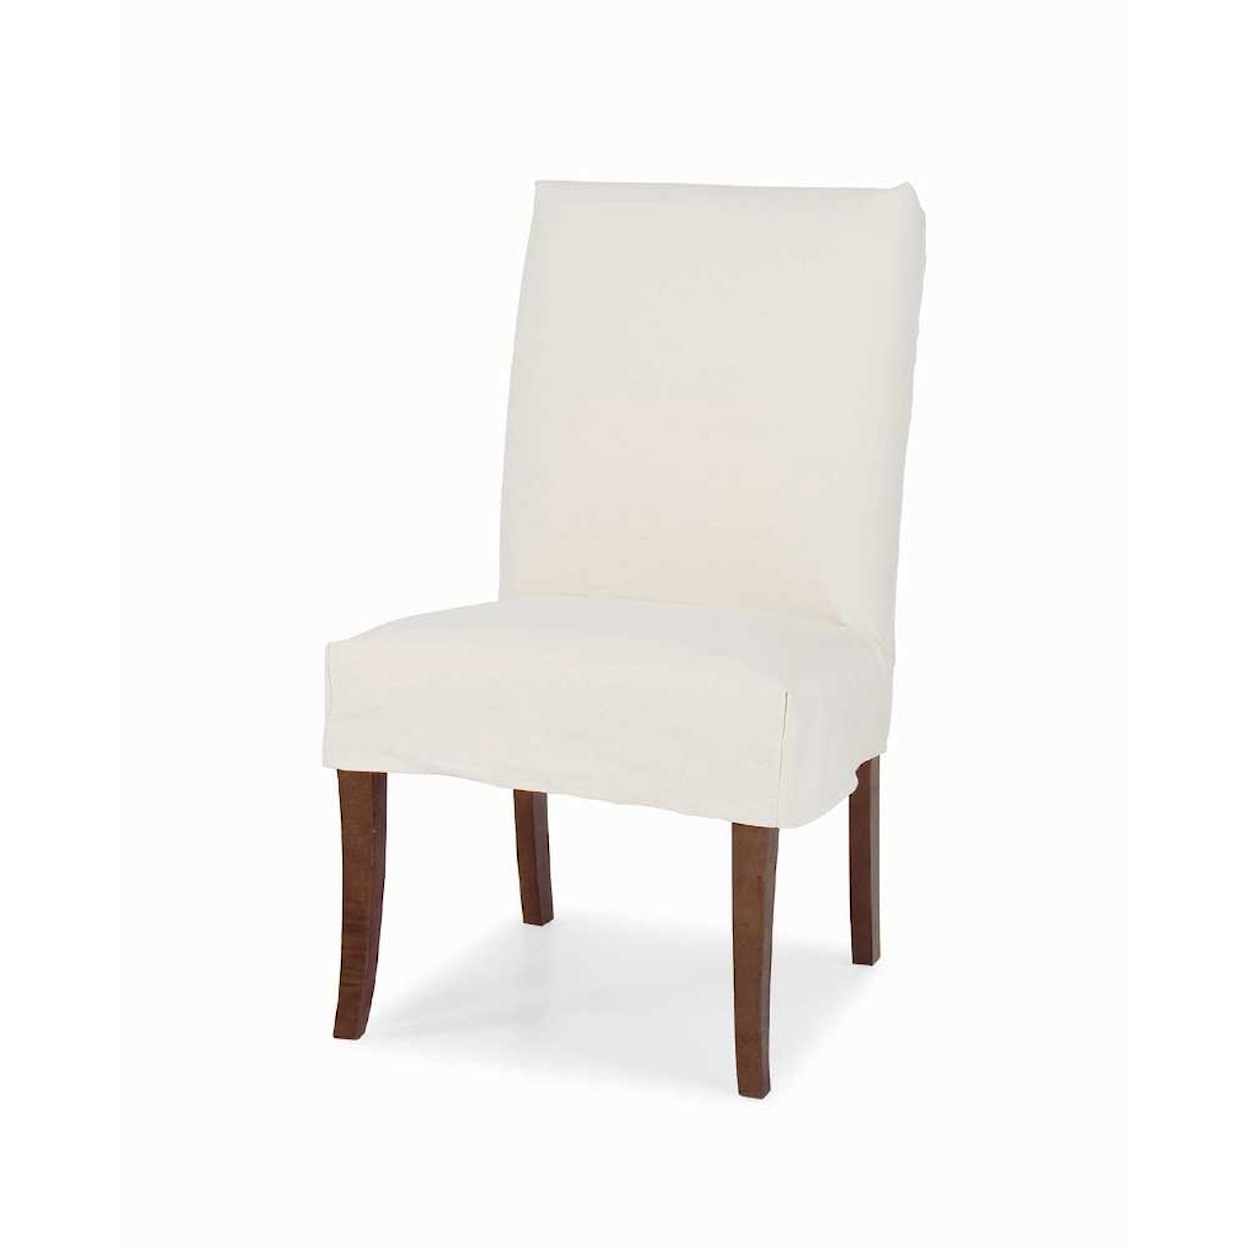 C.R. Laine Accents Domo Dining Chair